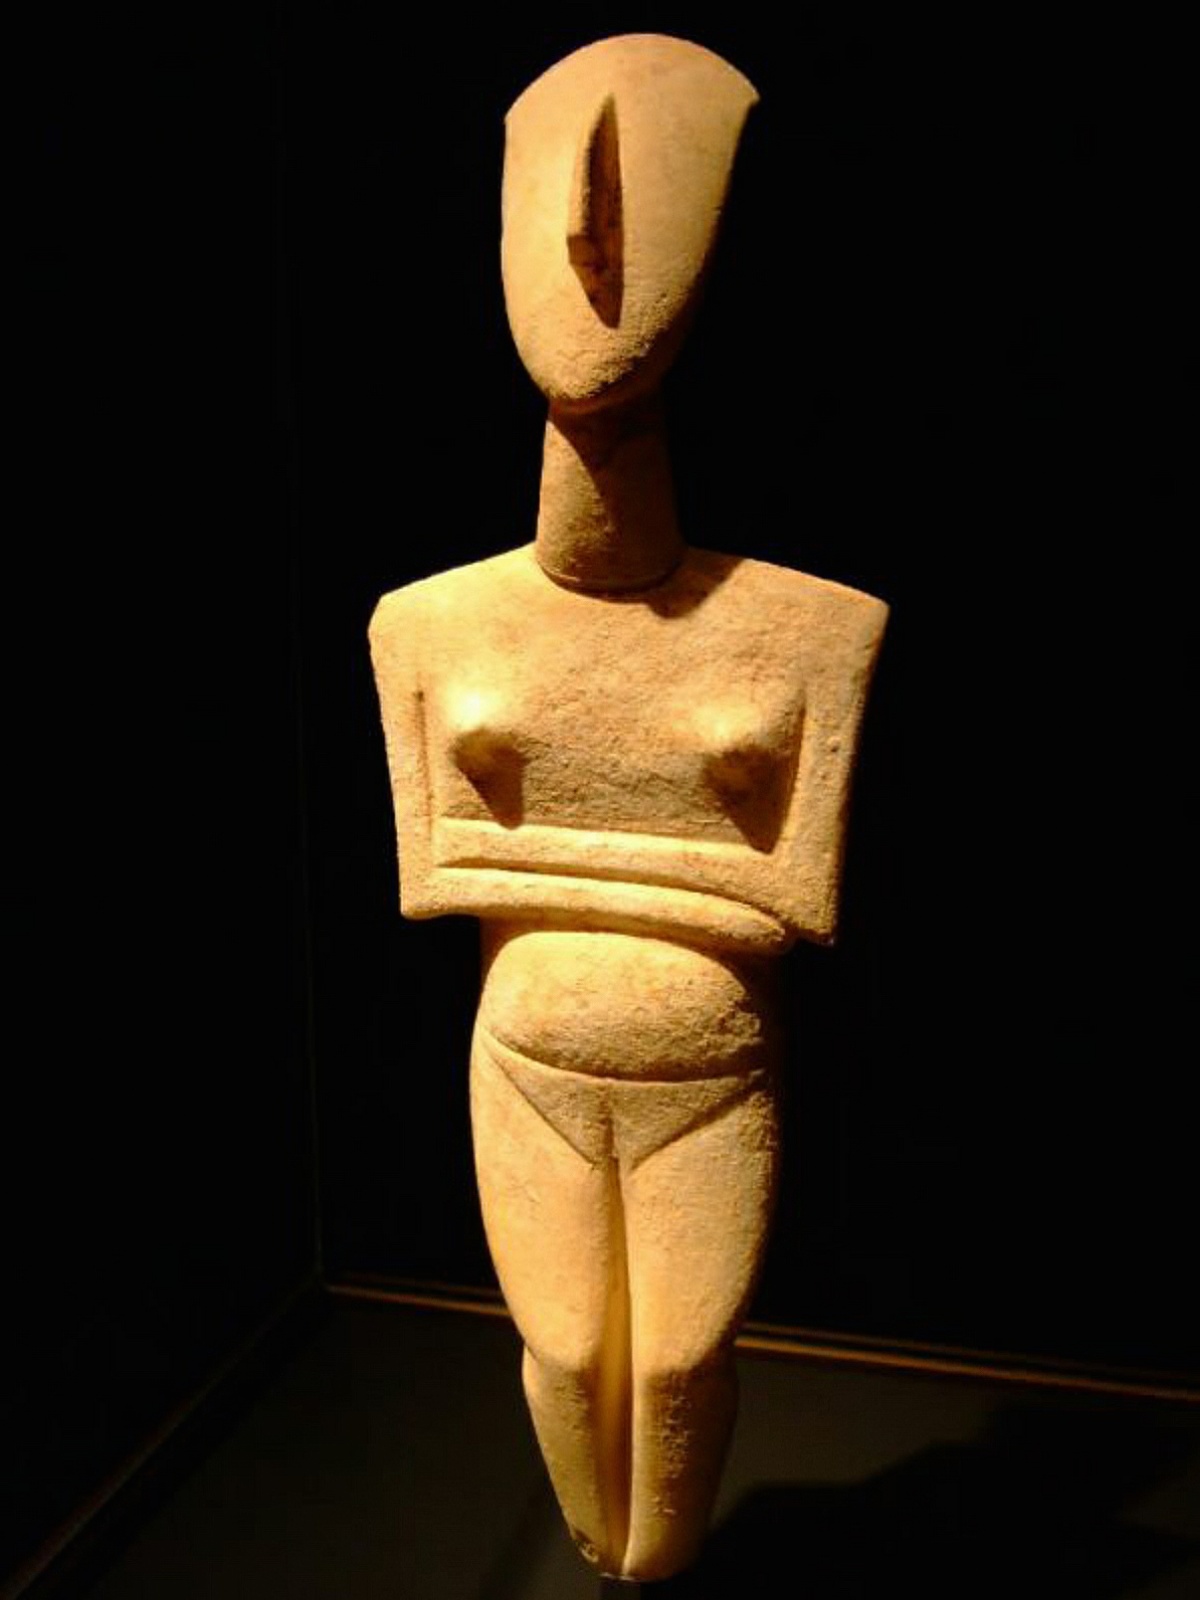 A marble figurine from the Cycladic islands